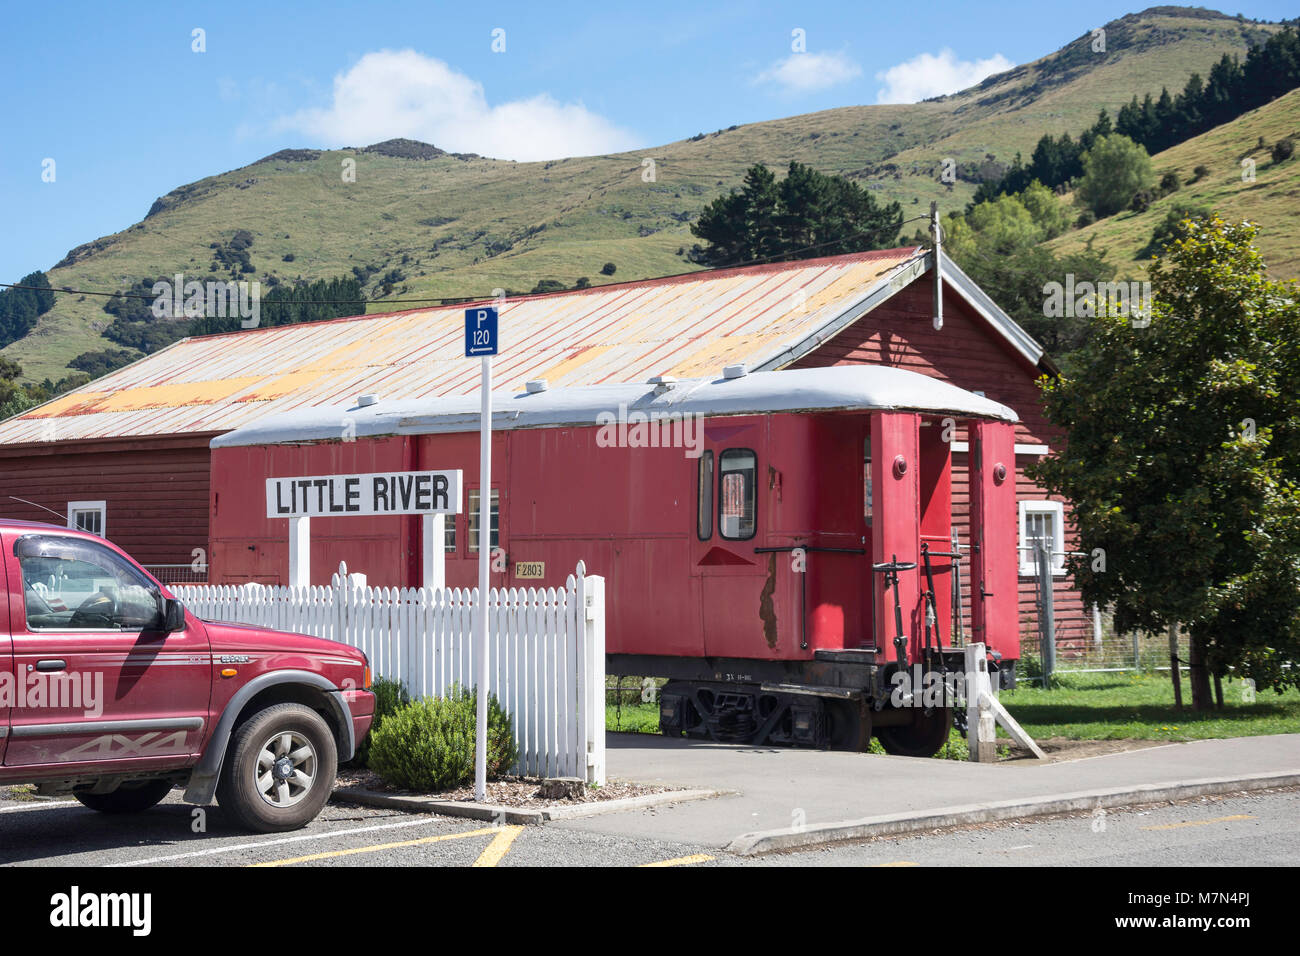 Restored railway carriage at former Railway Station, Little River, Banks Peninsula, Canterbury, New Zealand Stock Photo